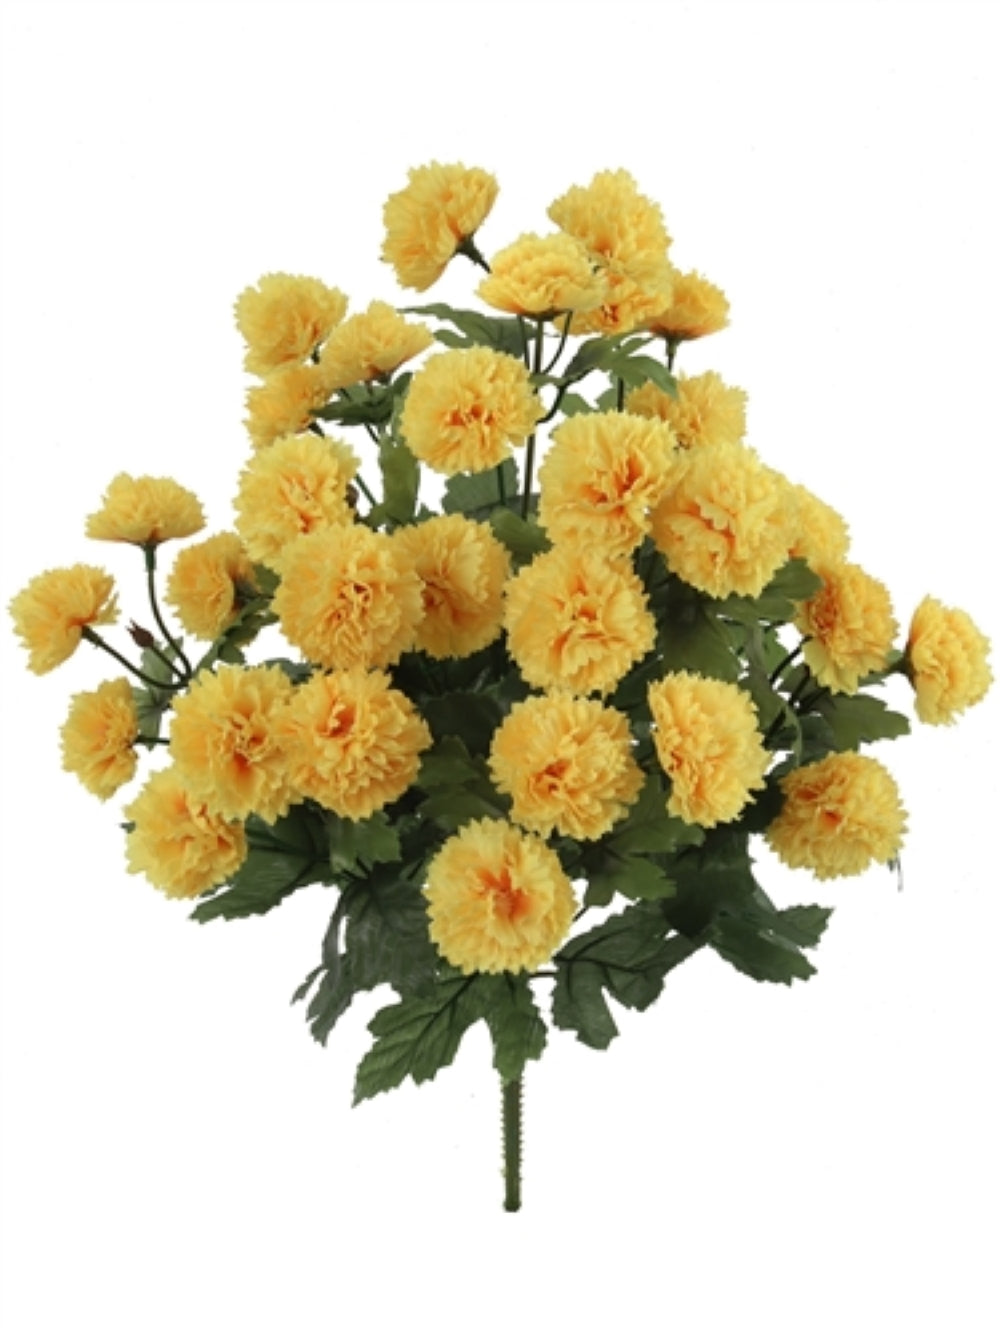 Set of 12 Bright 18" Tall Yellow Mum Bush with 11 Sprays & 33 Blooms - Ideal for Home Décor, Weddings, Craft Enthusiasts